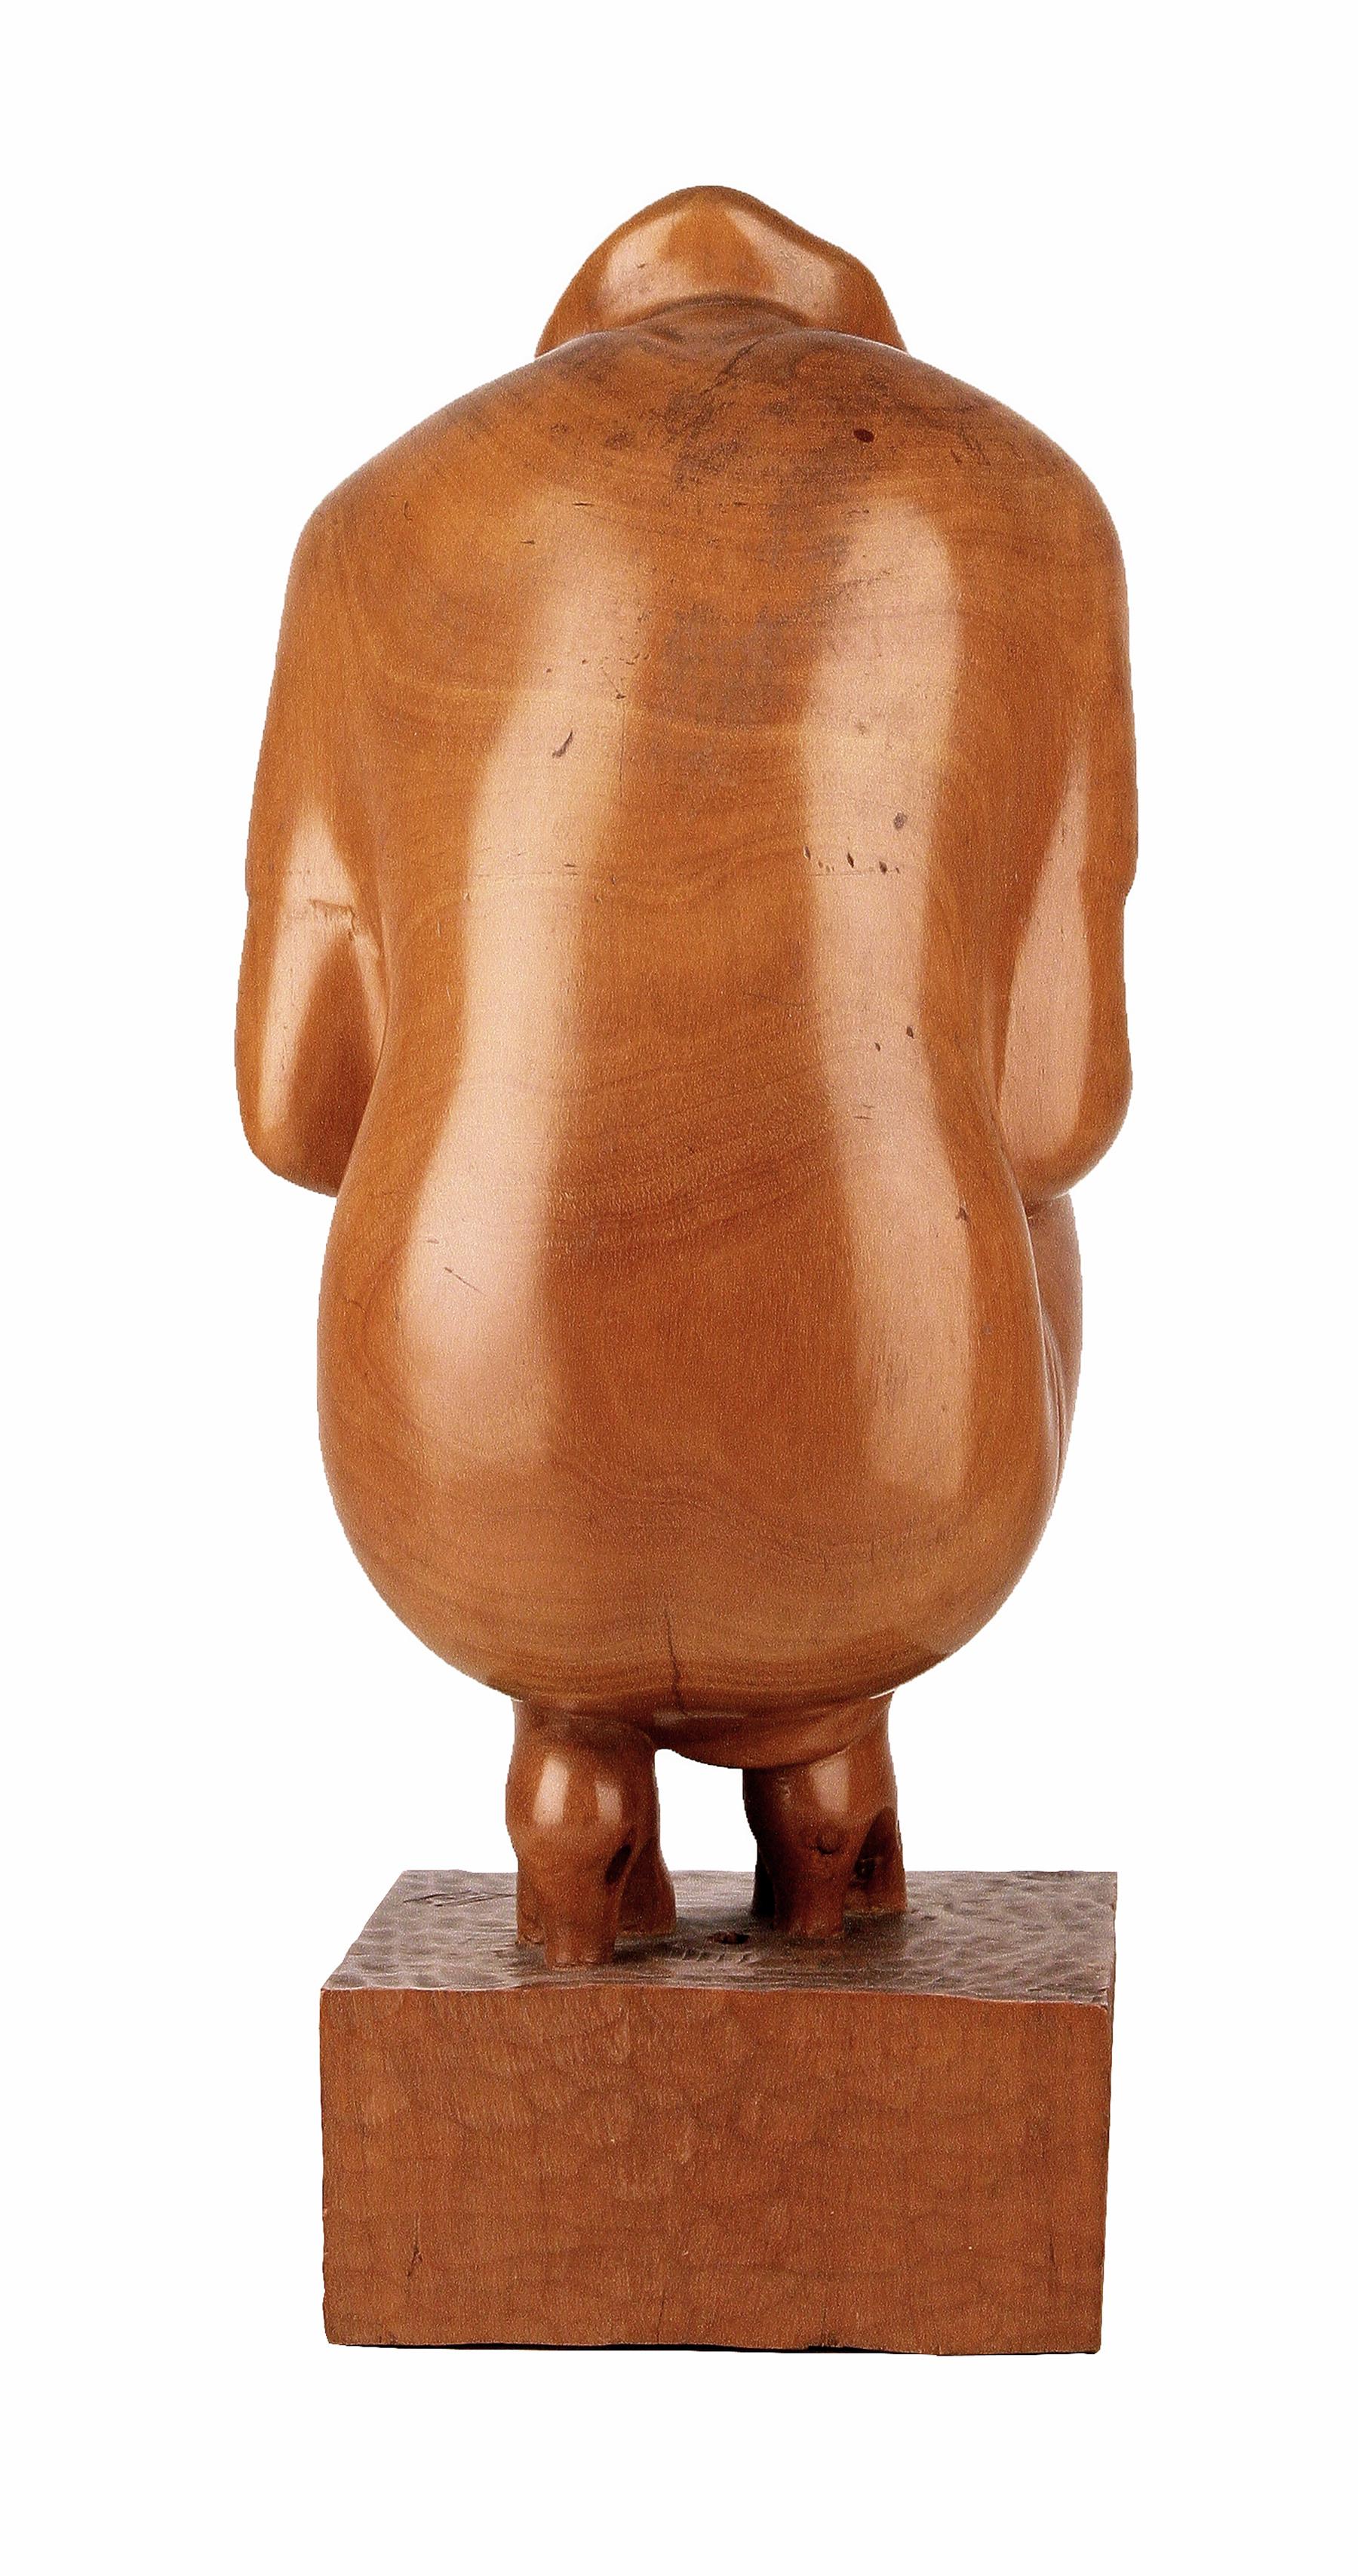 Carved Mid-20th Century Varnished Wood Sculpture of Crouched Lady by Godofredo Paino For Sale